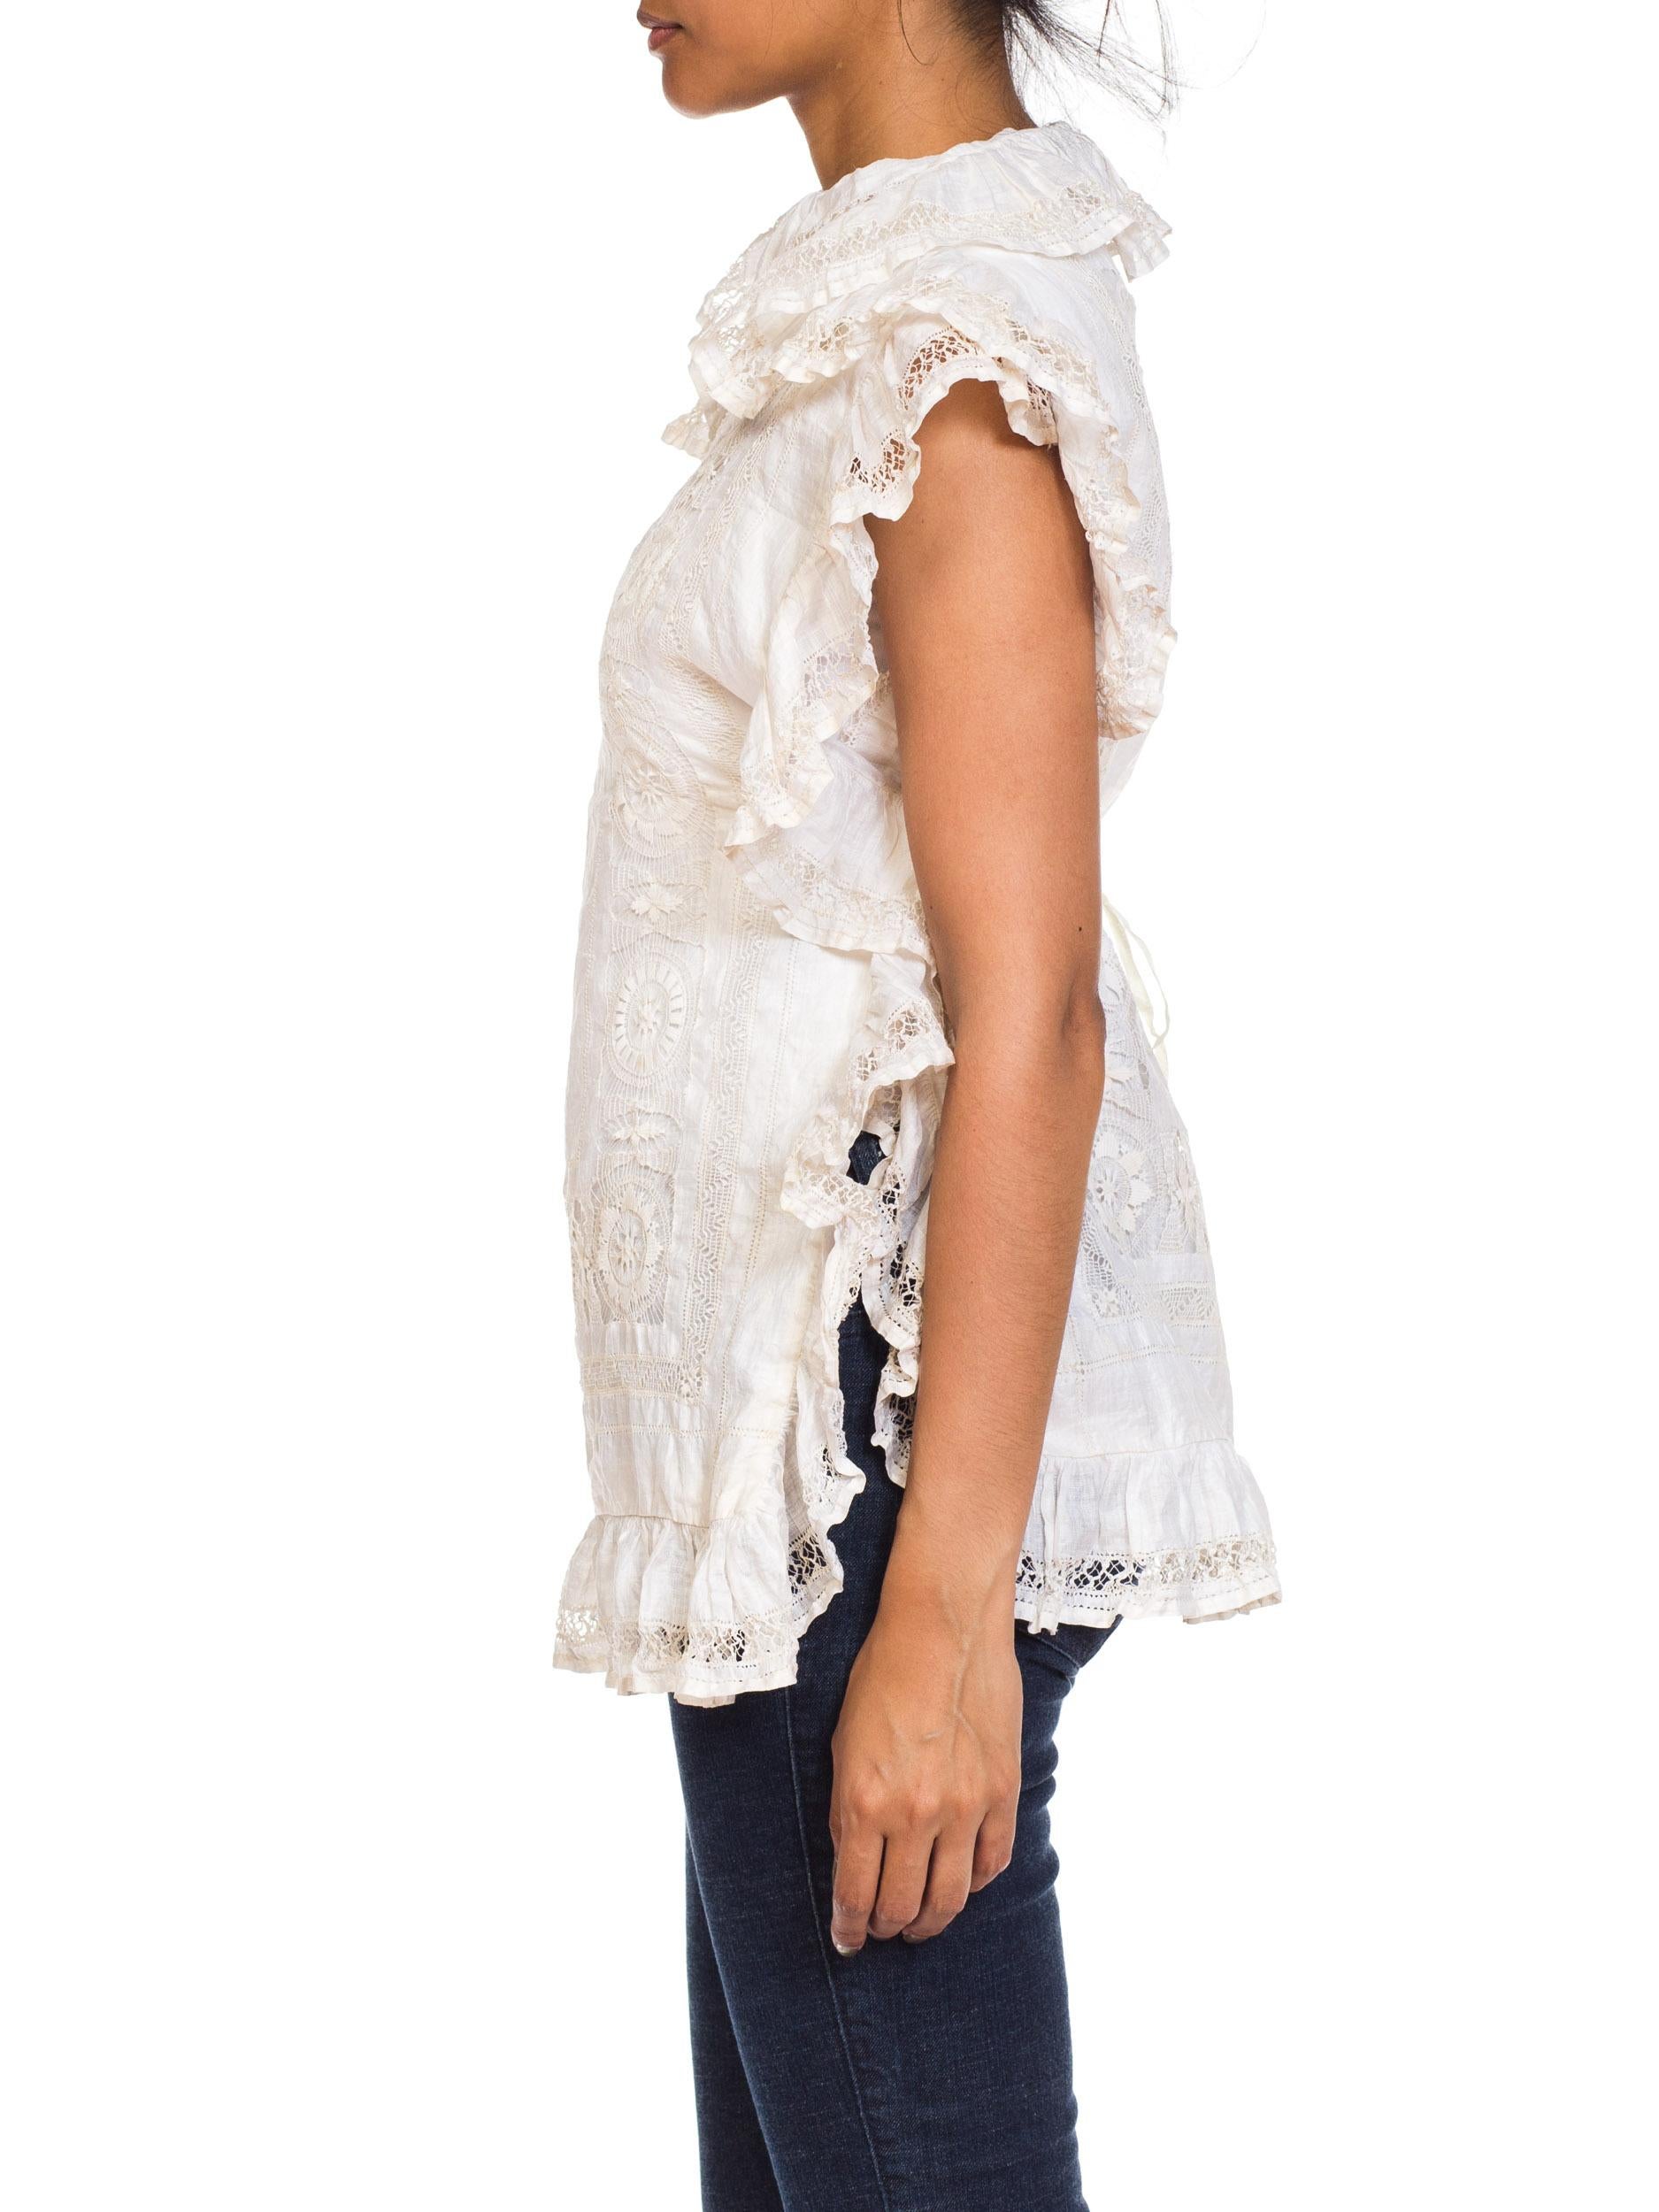 Handmade Lace & Linen Victorian Lace Top 3